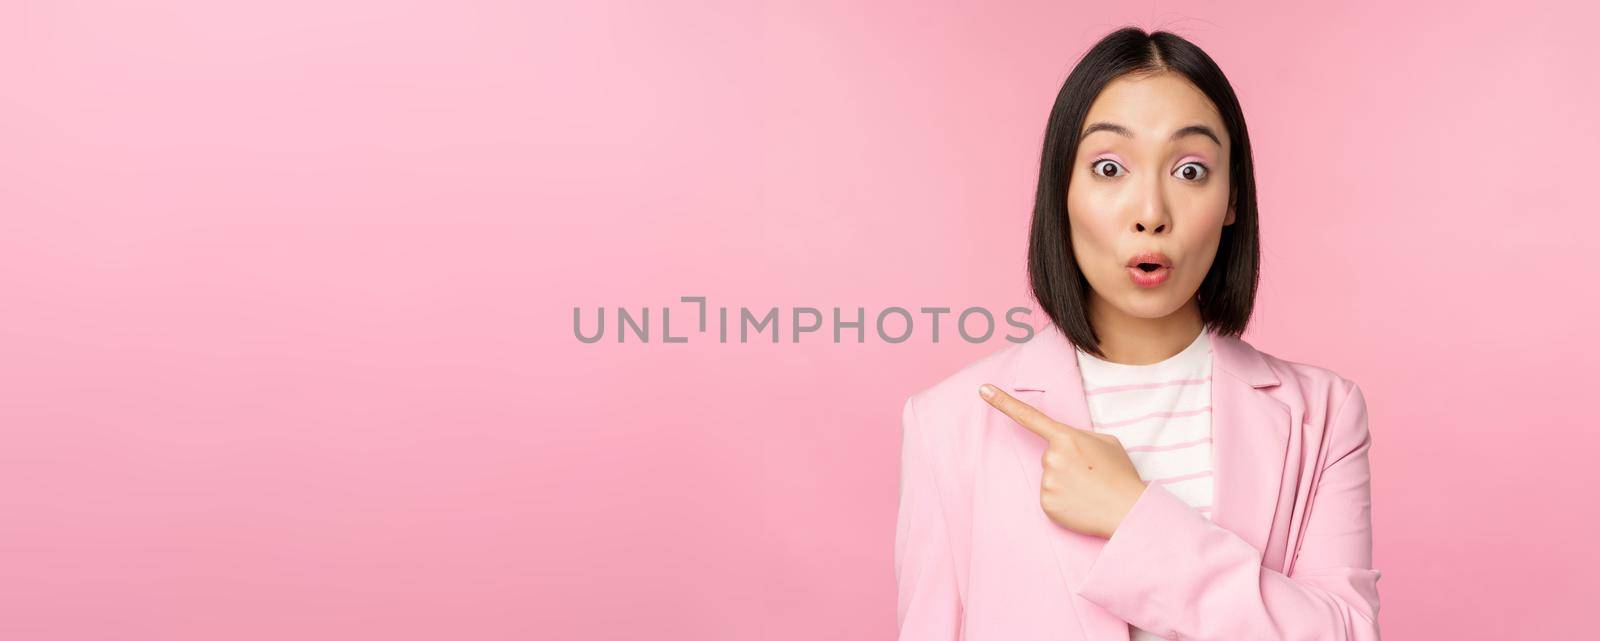 Portrait of businesswoman with surprised face, pointing finger left, showing smth interesting, standing over pink background in office suit.